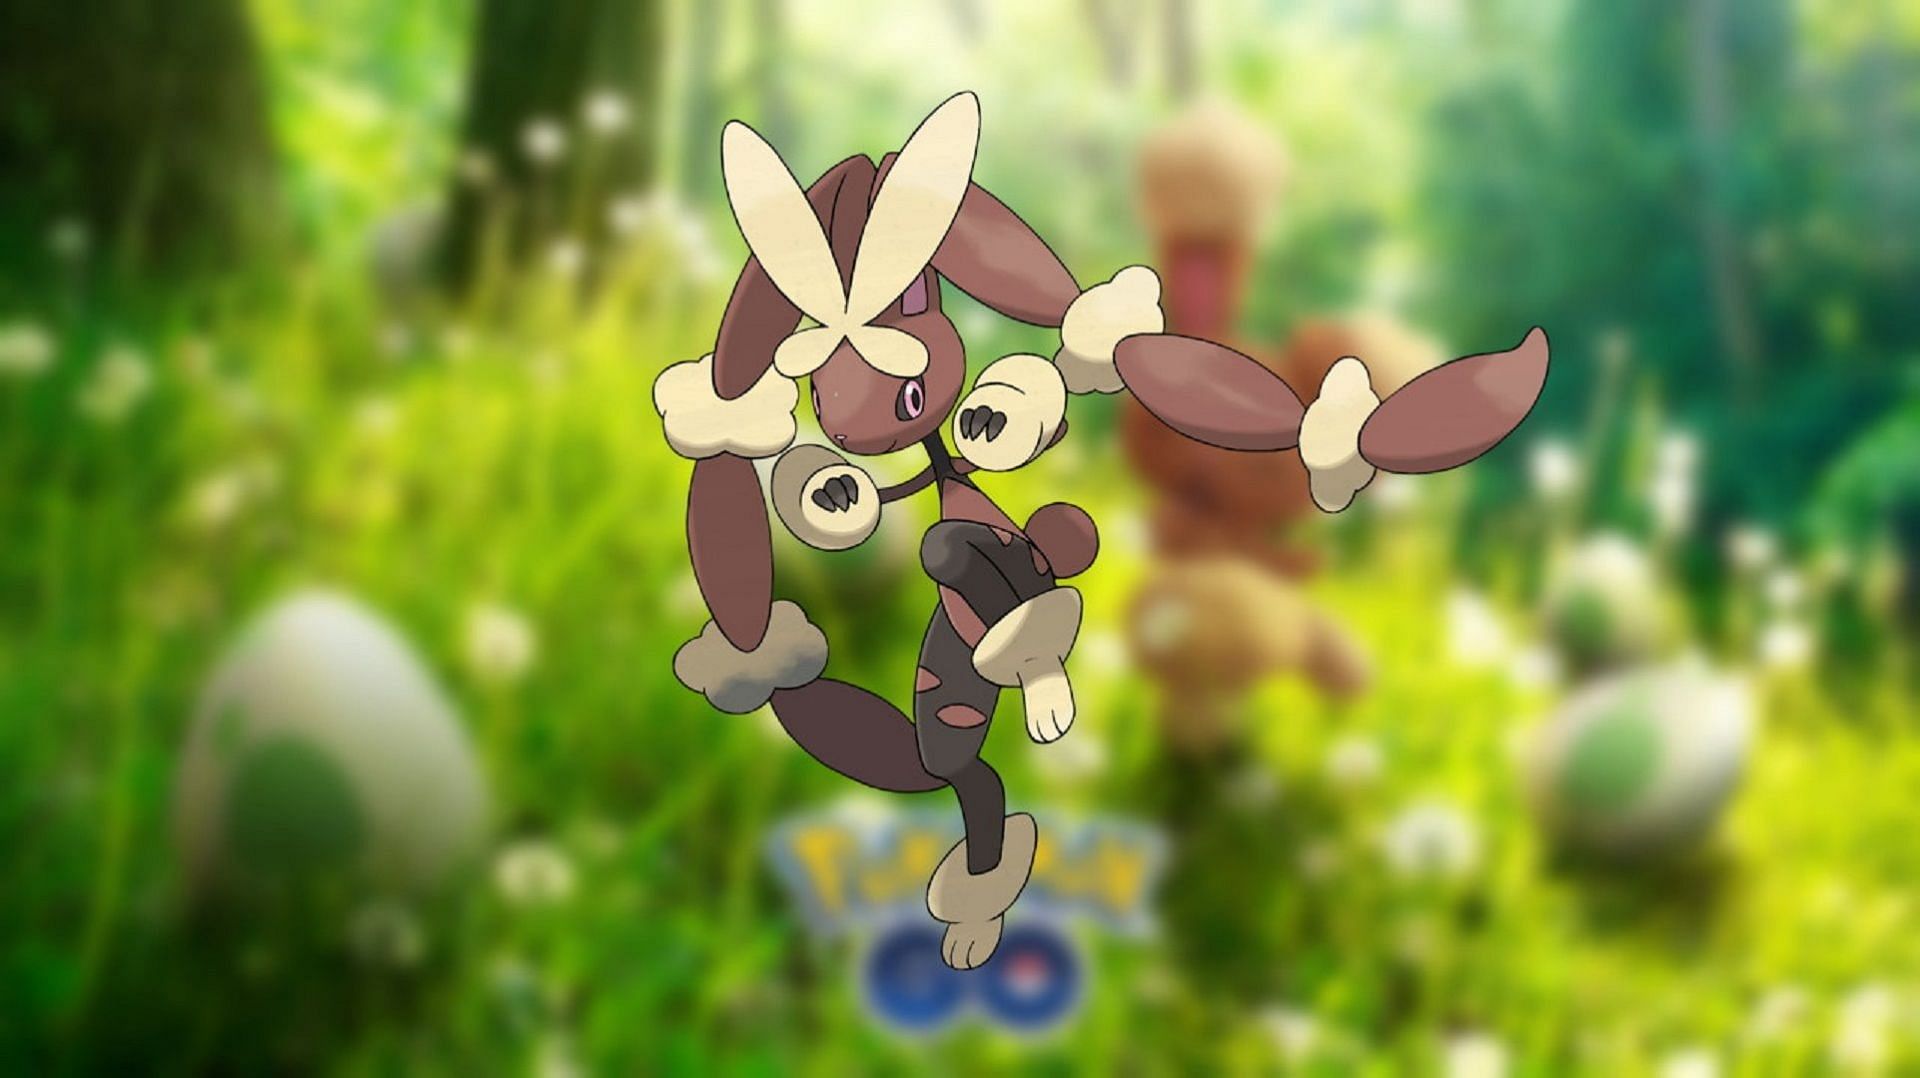 Mega Lopunny is a formidable Fighting/Normal-type opponent (Image via Niantic)